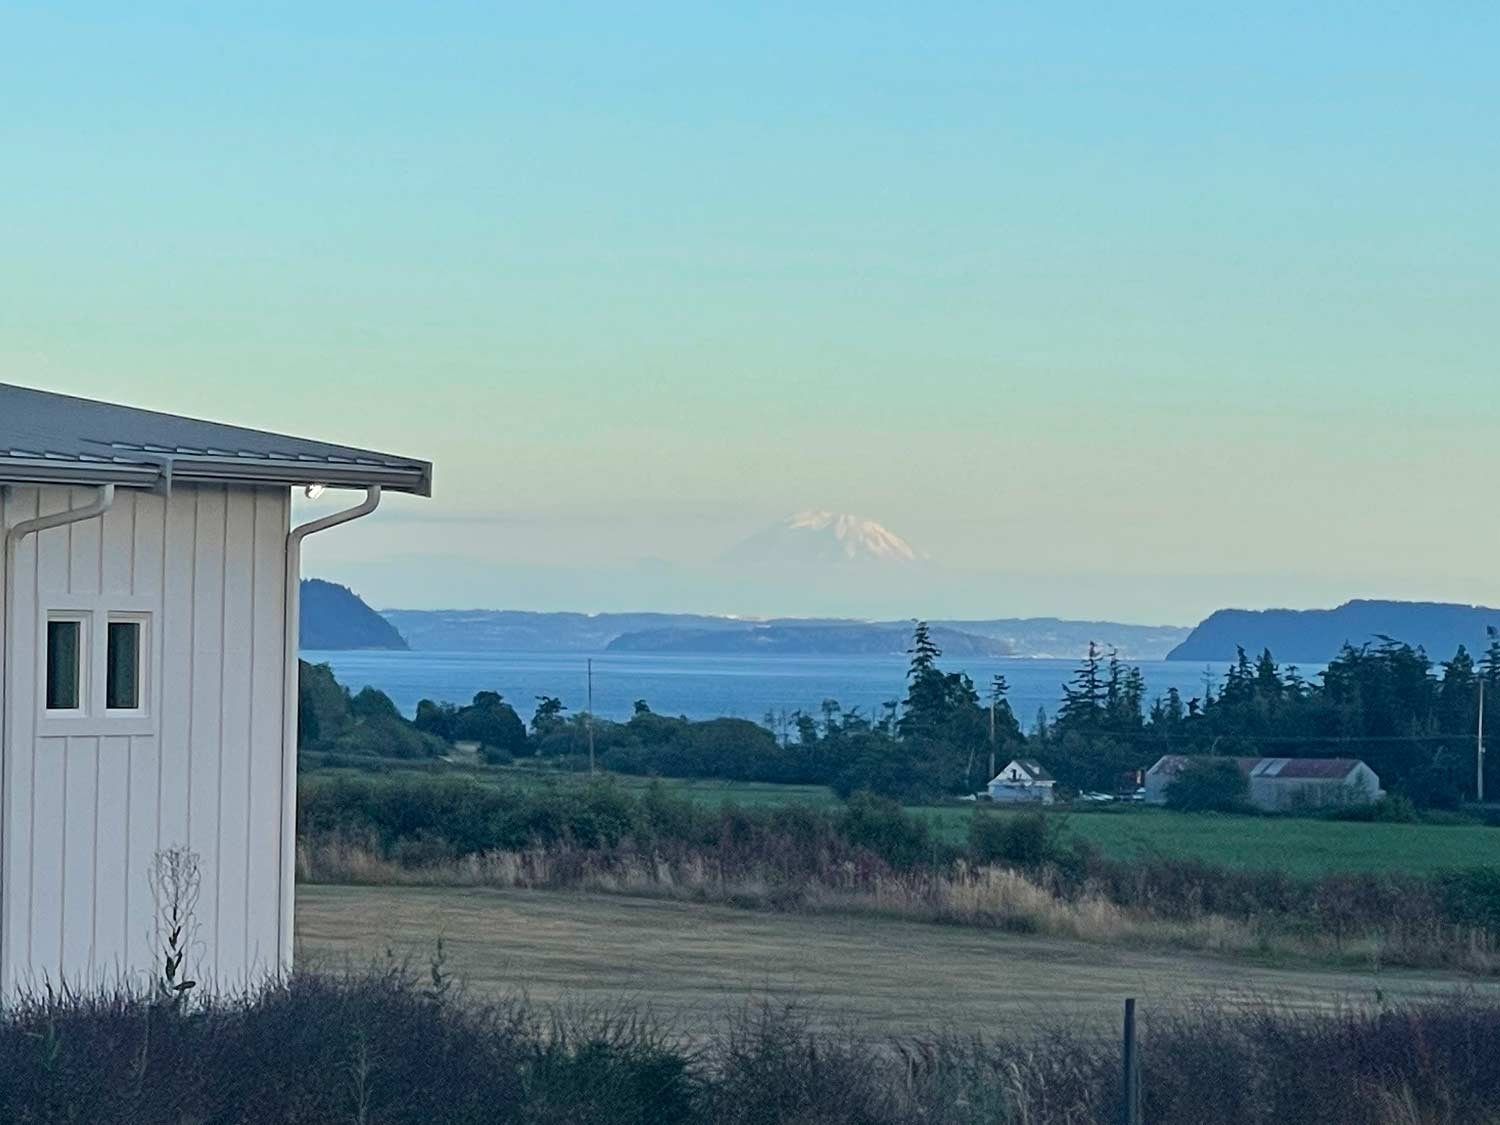 View of Mount Rainer and puget sound from Camano Island modern farm house